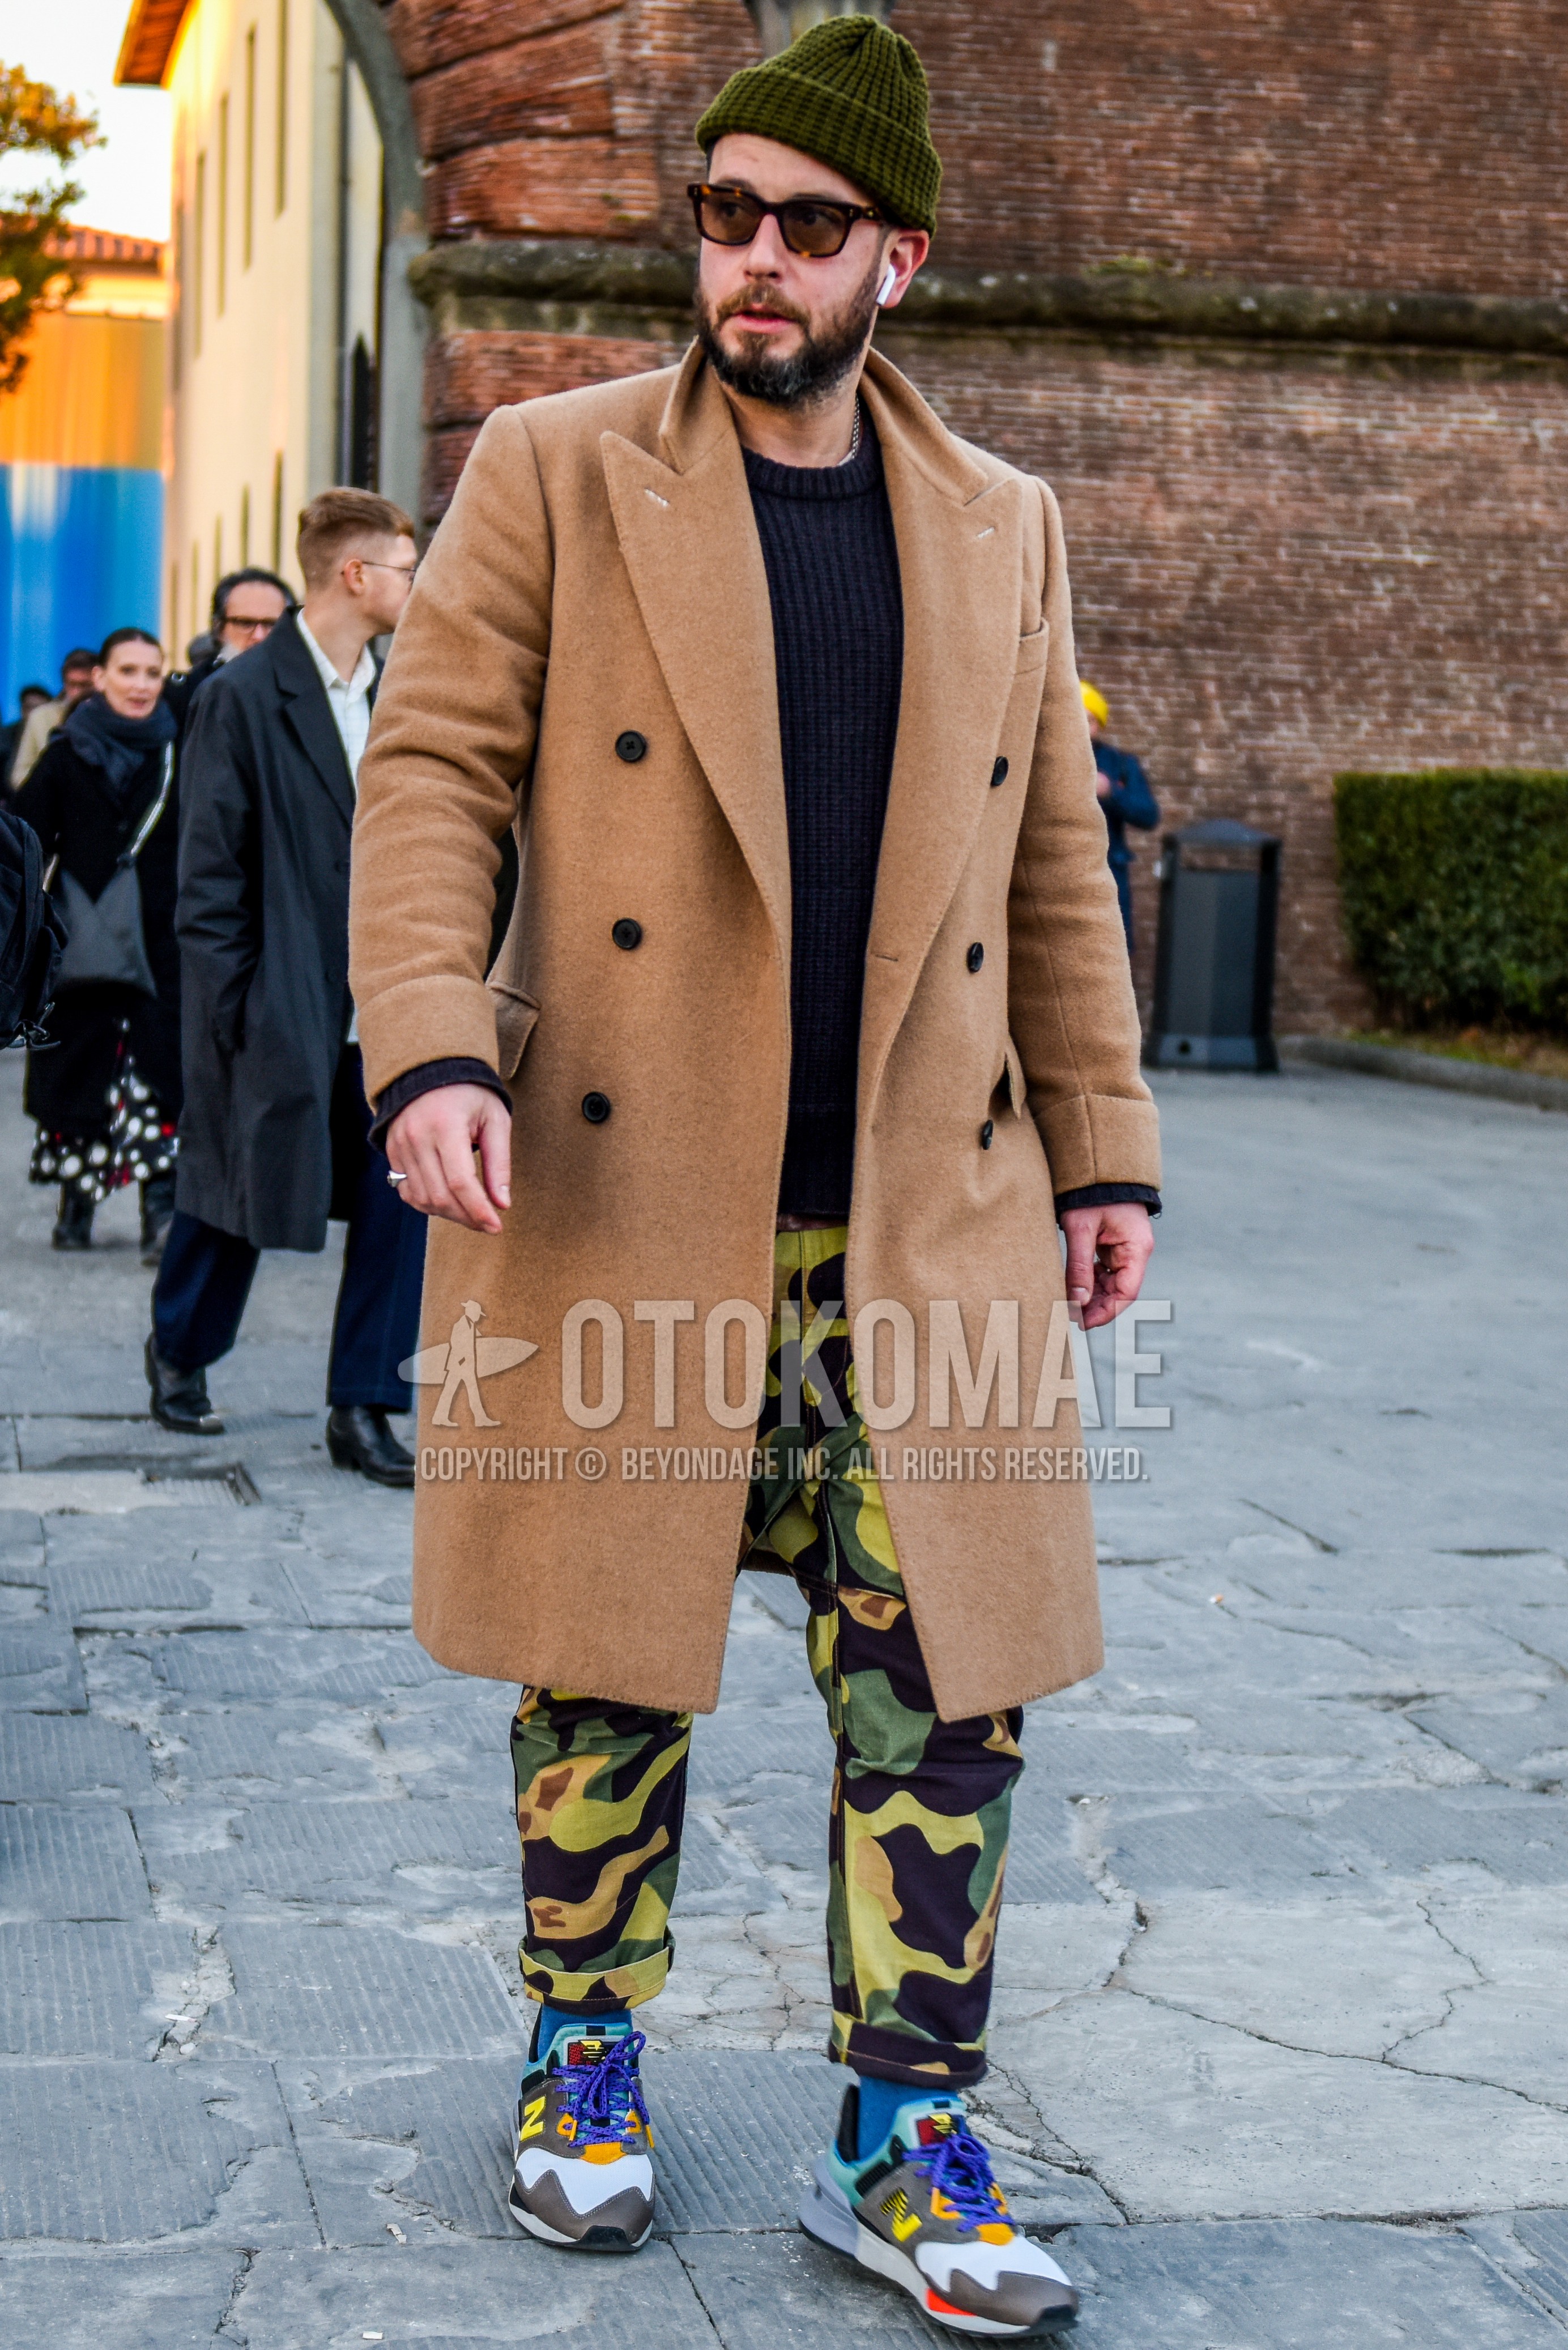 Men's autumn winter outfit with olive green plain knit cap, brown tortoiseshell sunglasses, beige plain chester coat, black plain sweater, green beige camouflage chinos, gray plain socks, gray low-cut sneakers.